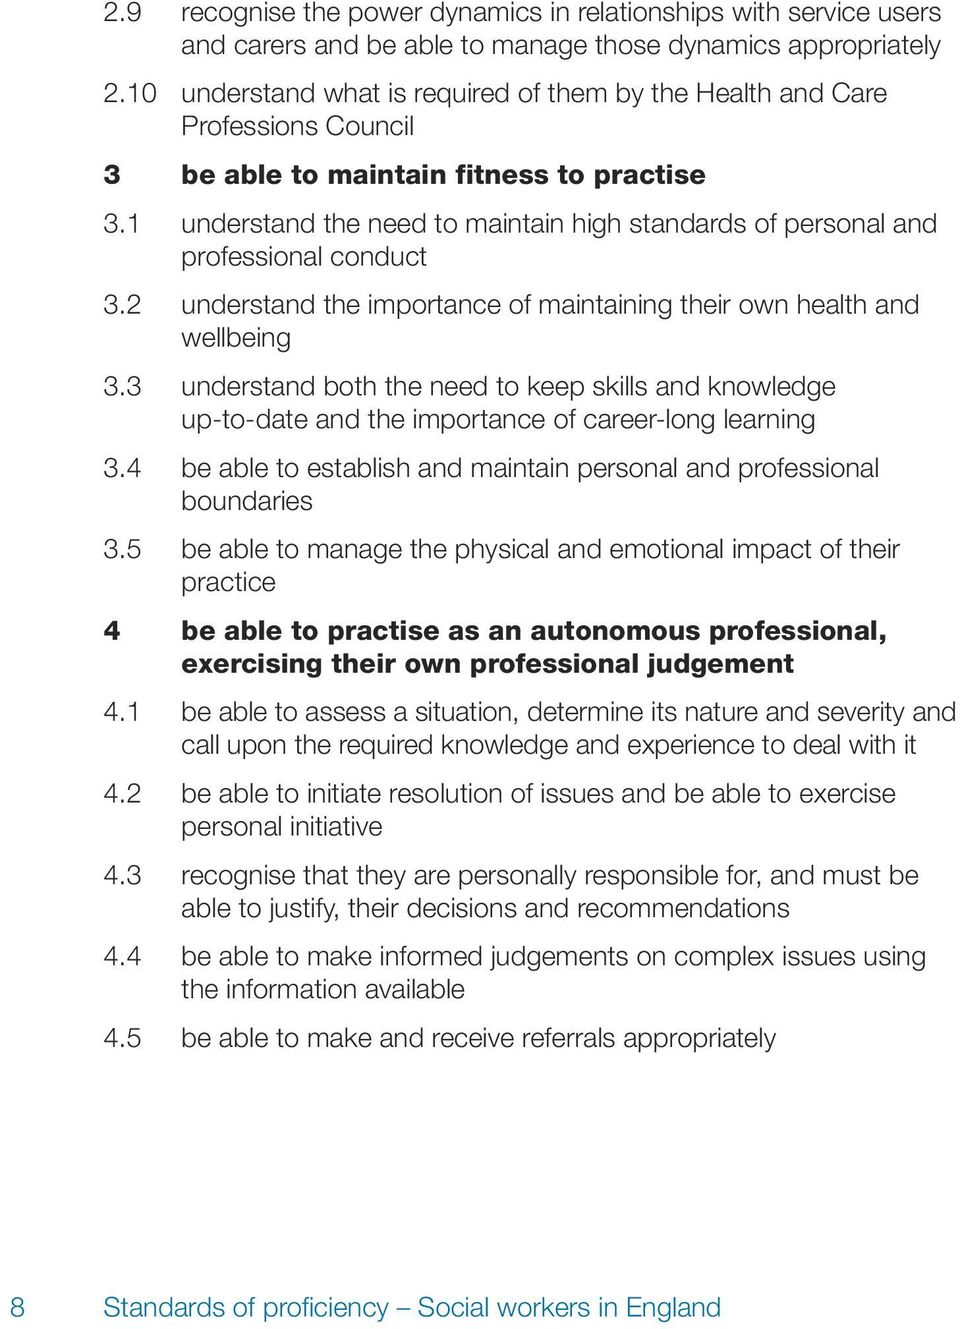 1 understand the need to maintain high standards of personal and professional conduct 3.2 understand the importance of maintaining their own health and wellbeing 3.